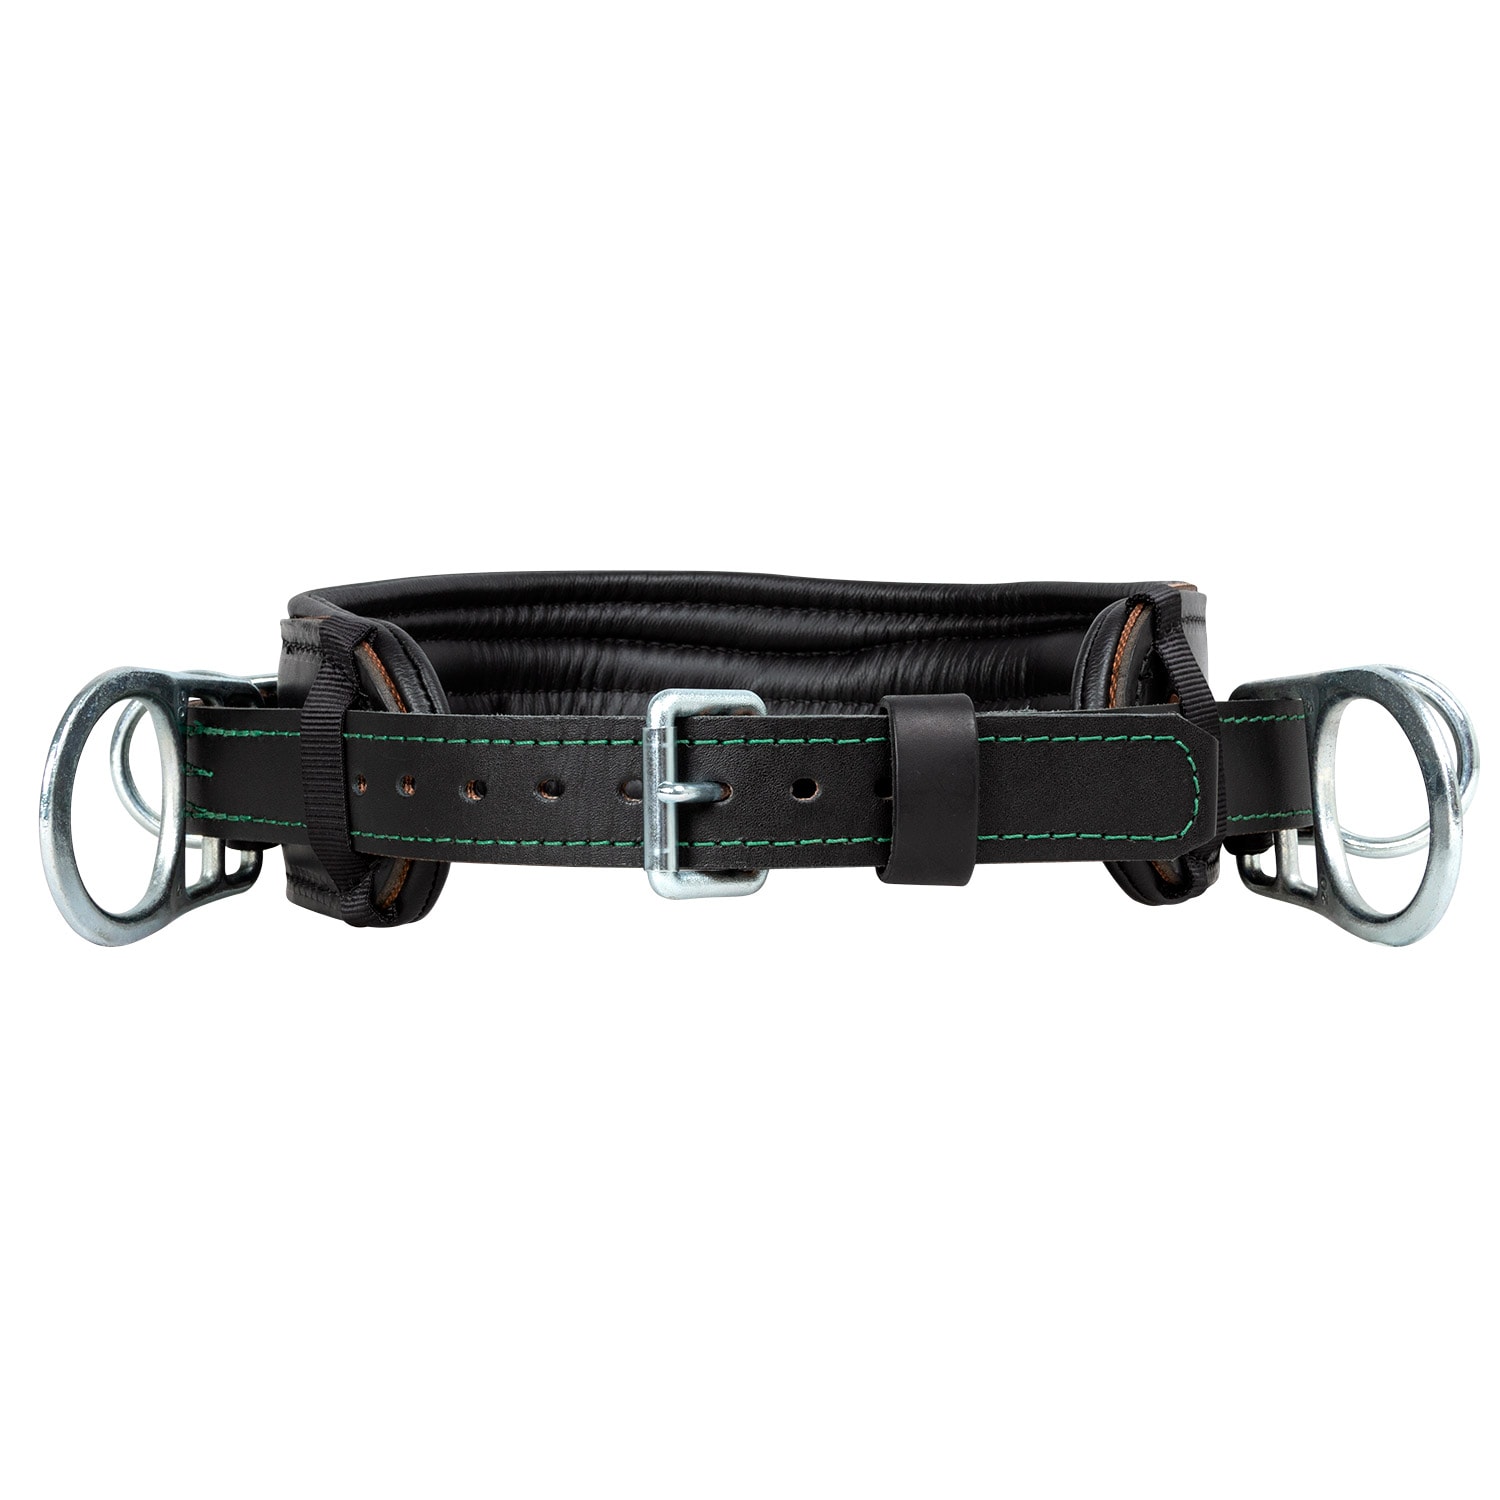 Buckingham Adjustable In-Line 4 D-Ring Leather Body BeltBuckingham Adjustable In-Line 4 D-Ring Leather Body Belt from Columbia Safety